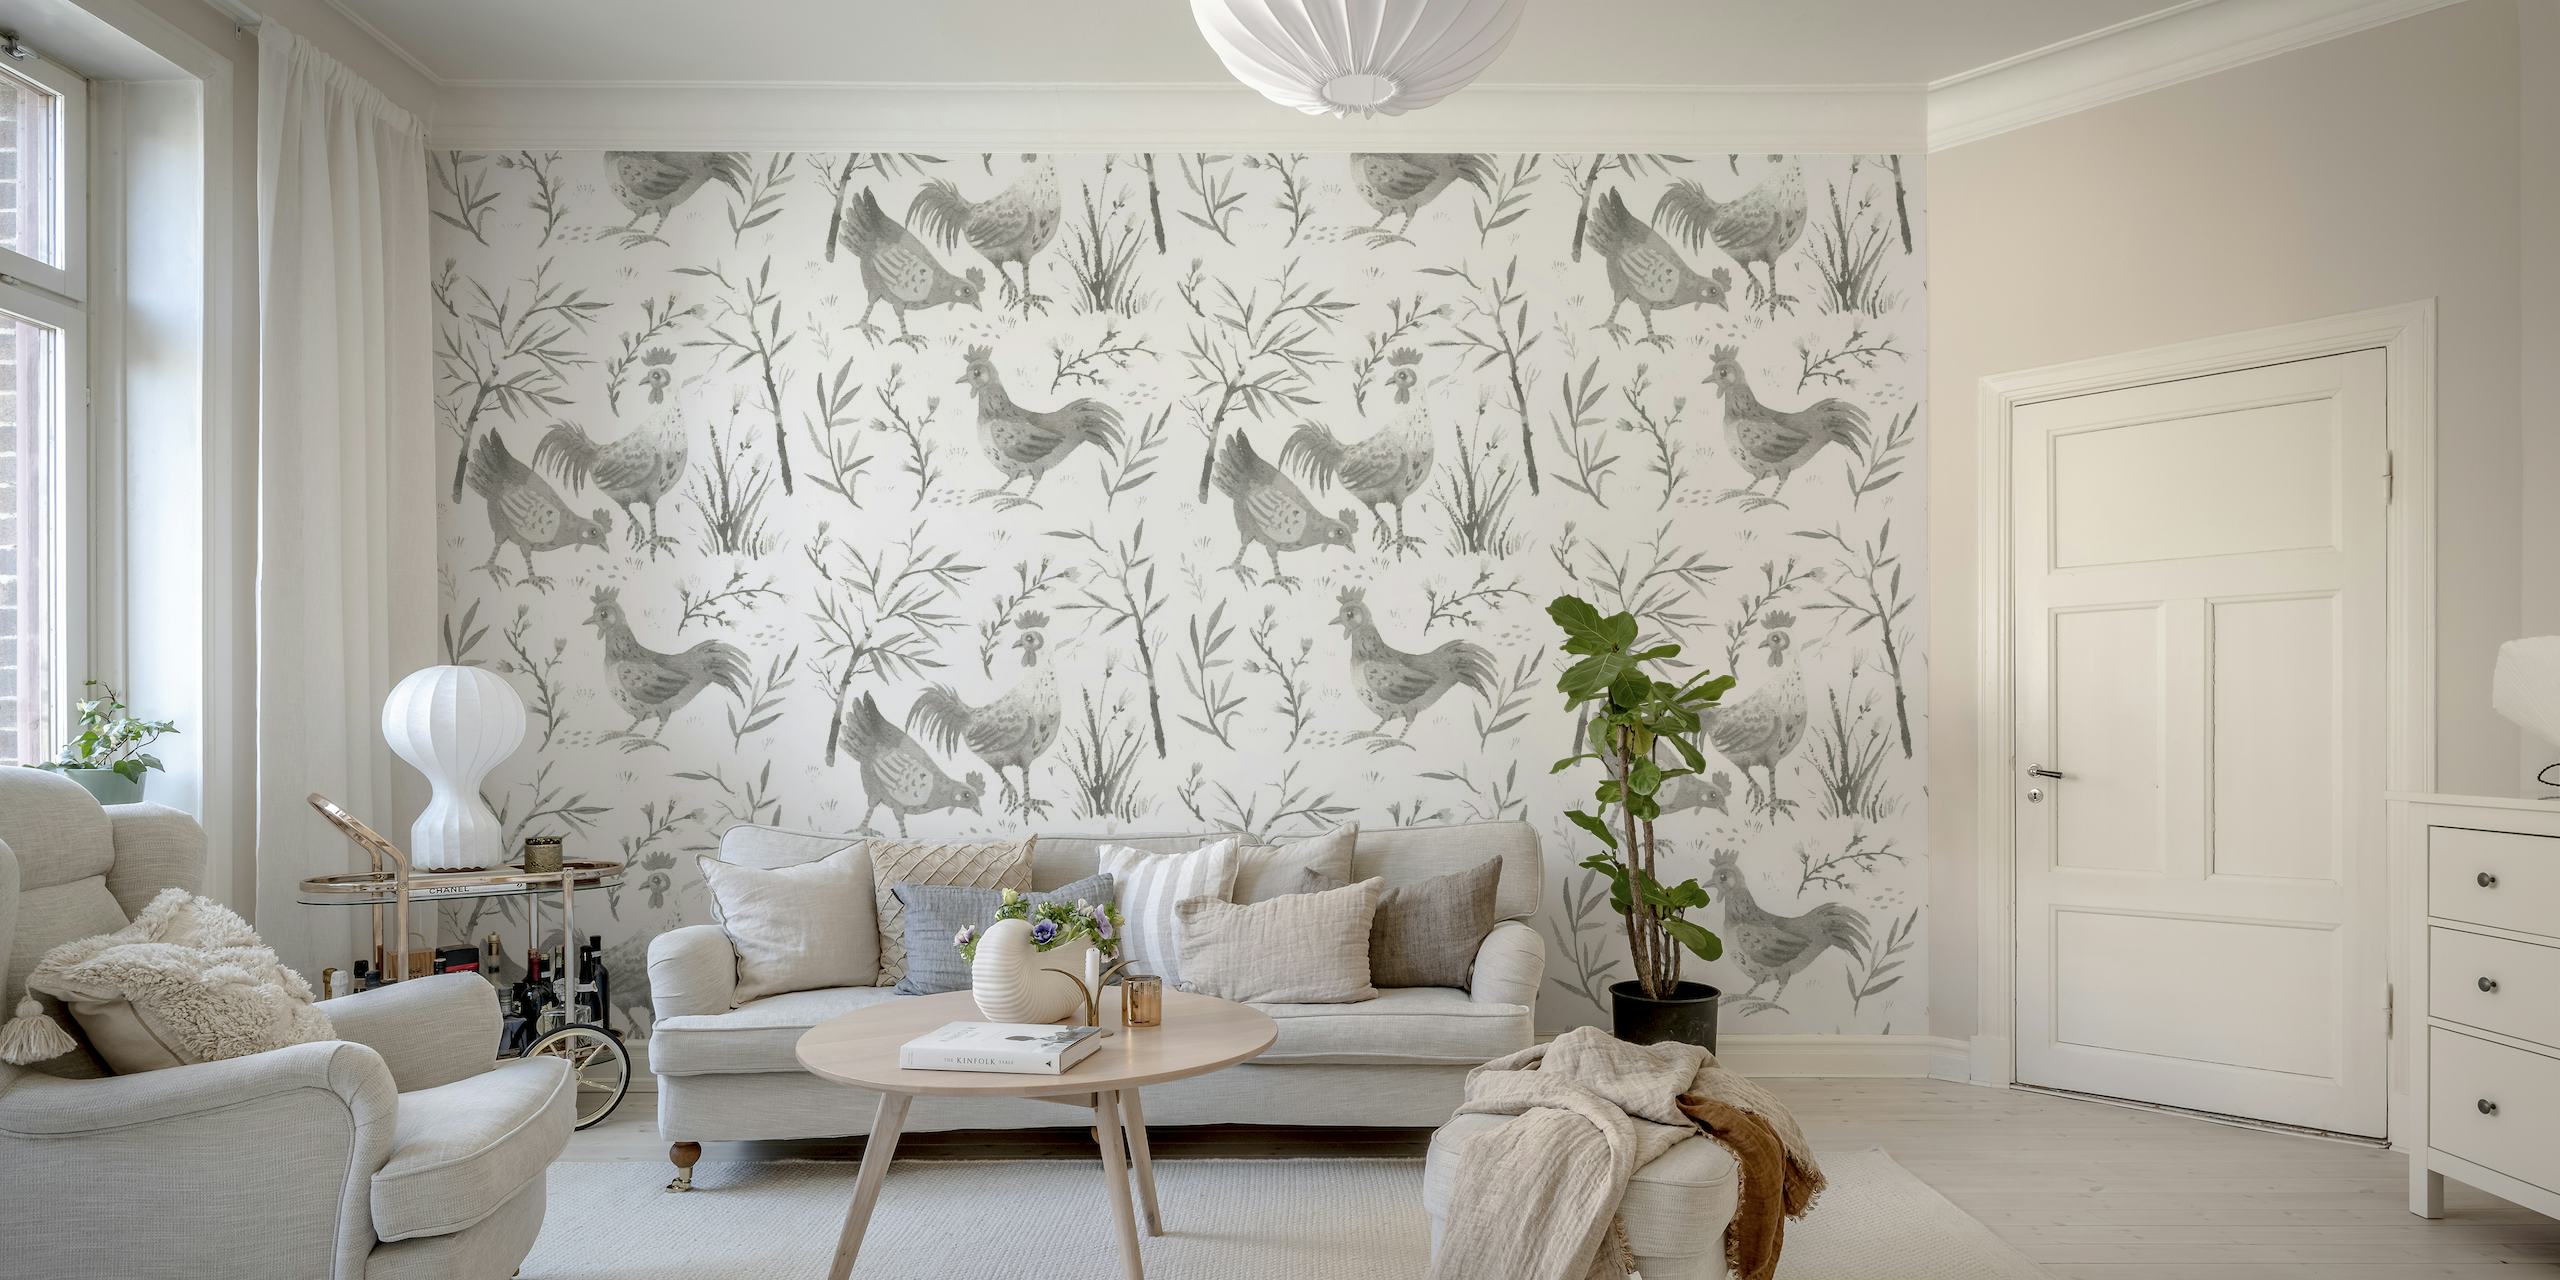 Grey Chickens with Bamboo wallpaper